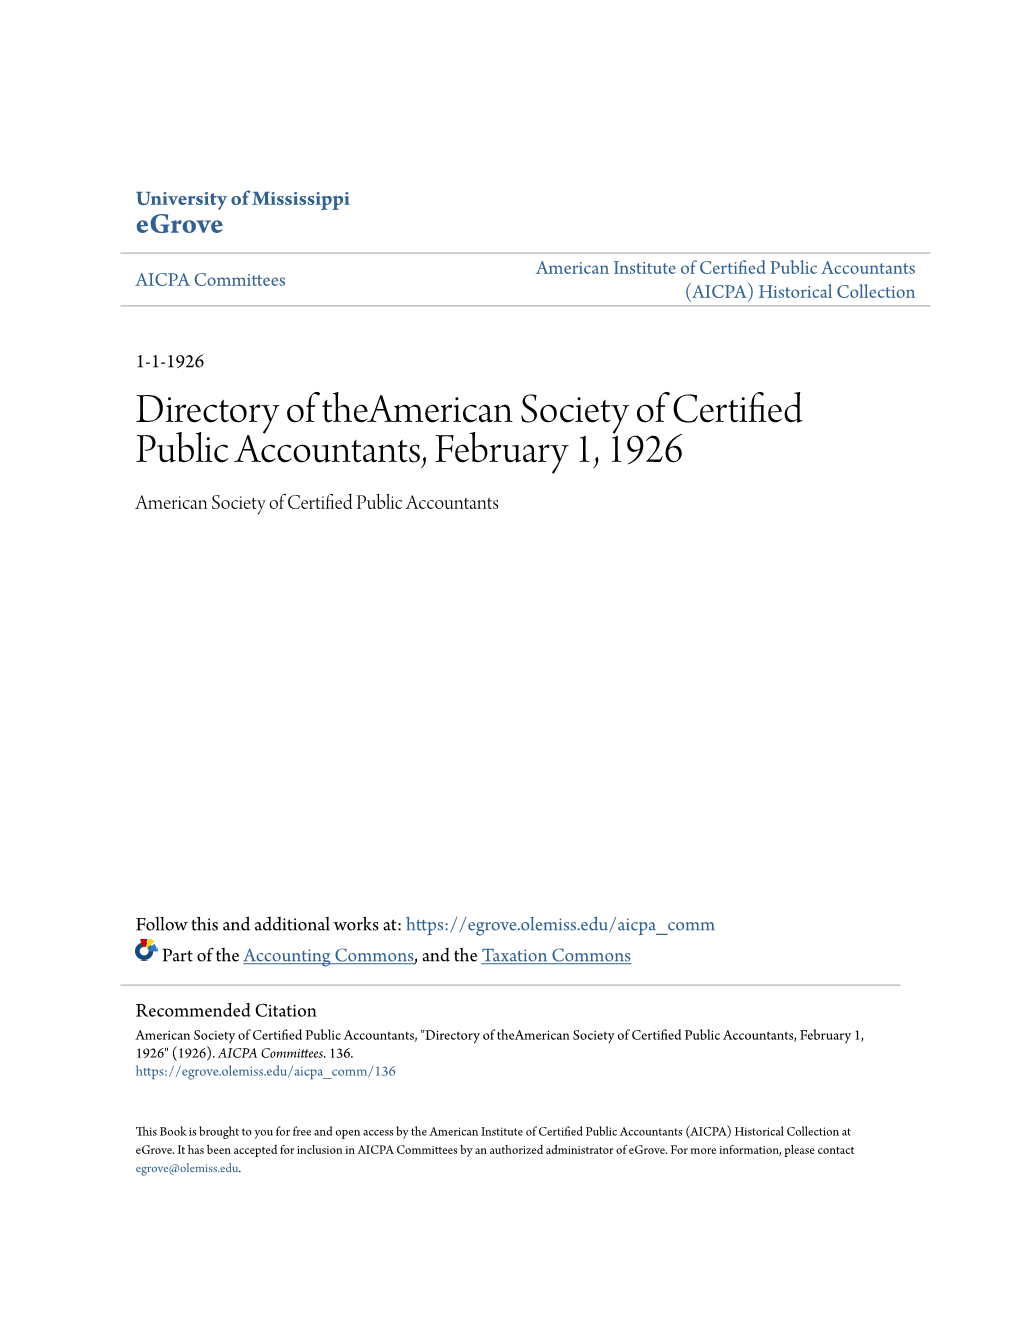 Directory of Theamerican Society of Certified Public Accountants, February 1, 1926 American Society of Certified Public Accountants